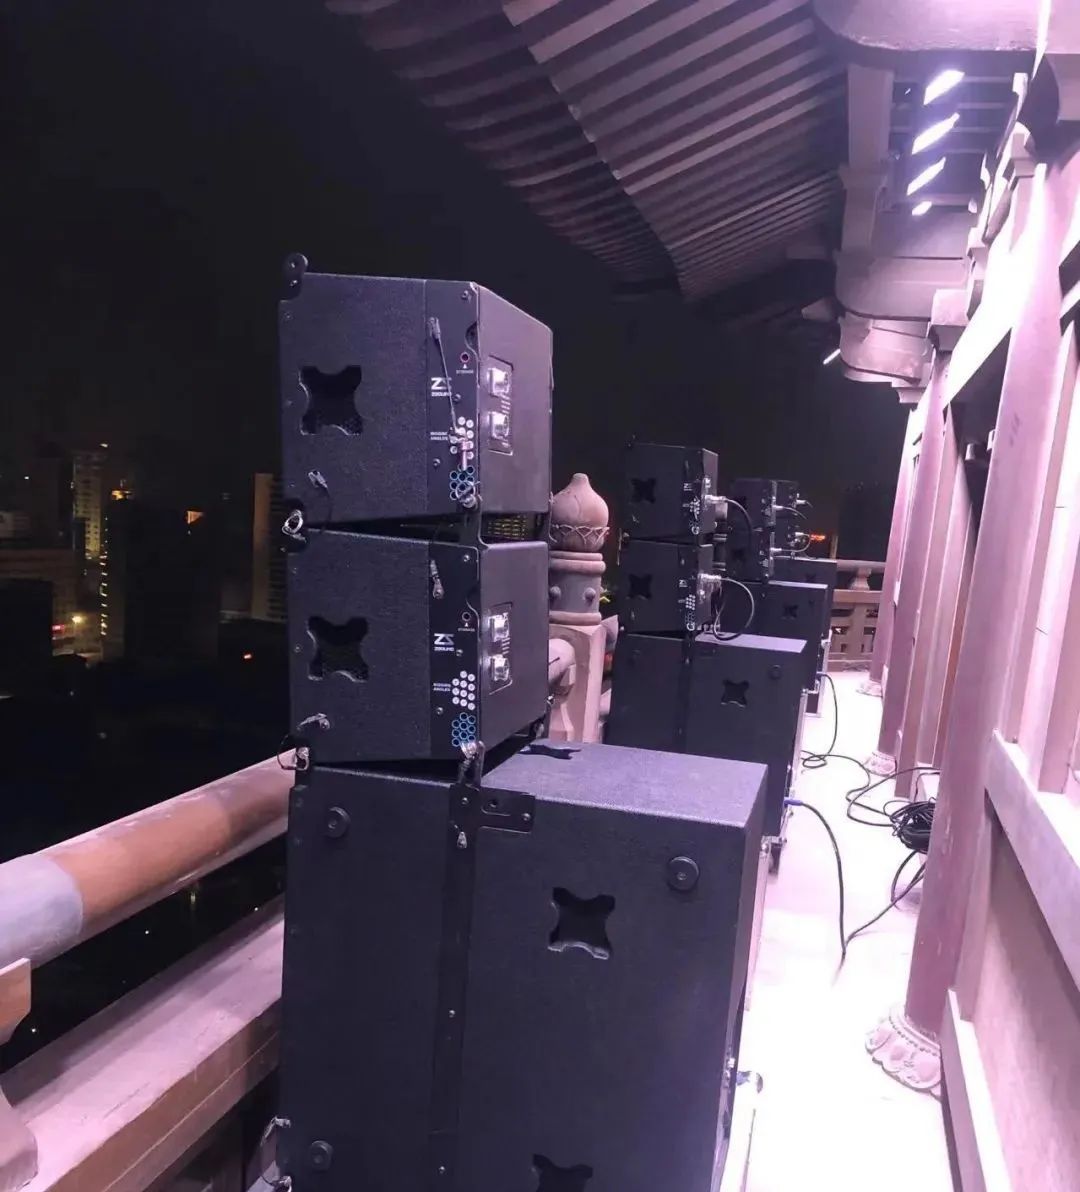 ZSOUND Boosts New Year's Eve Celebration with Professional Sound System at Tianning Temple Tower Plaza